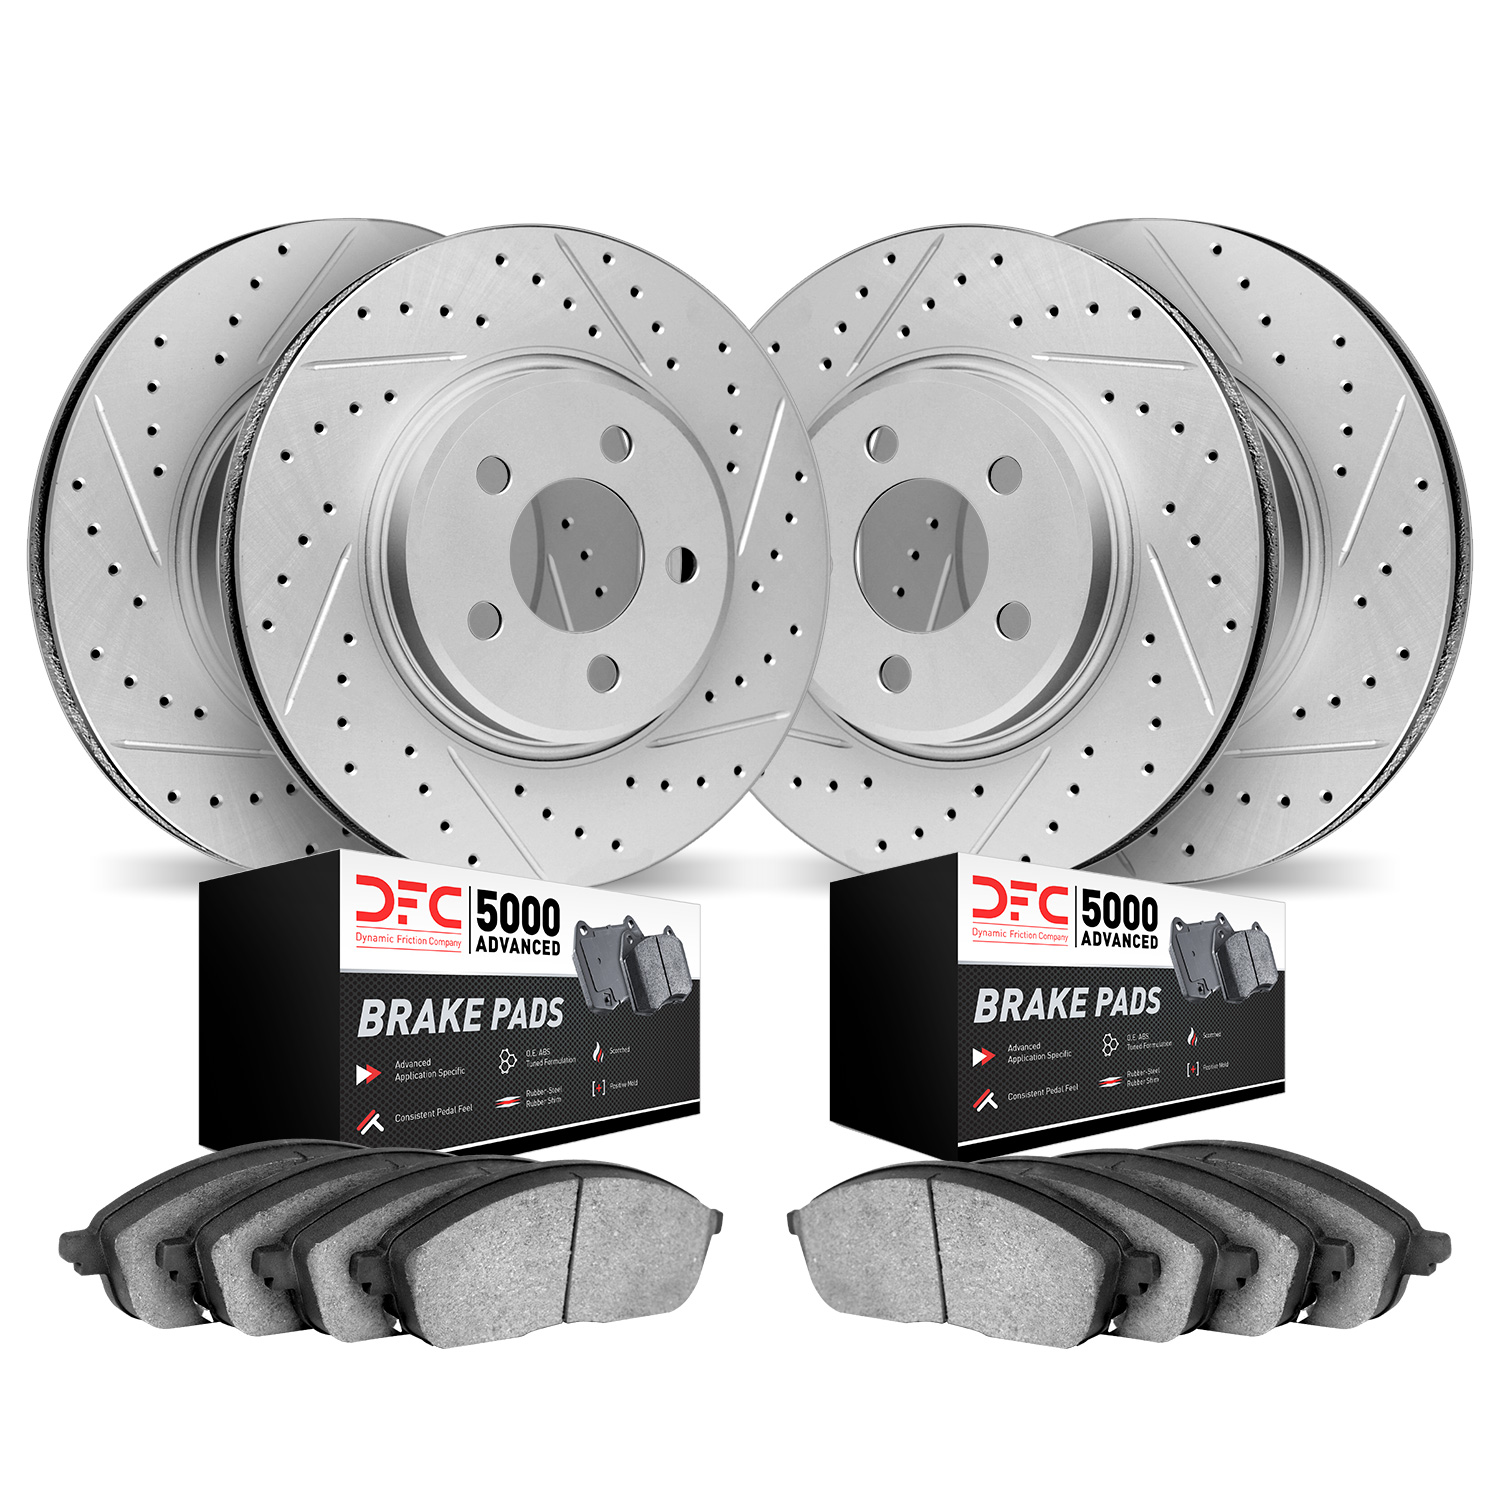 2504-39012 Geoperformance Drilled/Slotted Rotors w/5000 Advanced Brake Pads Kit, 2006-2014 Mopar, Position: Front and Rear